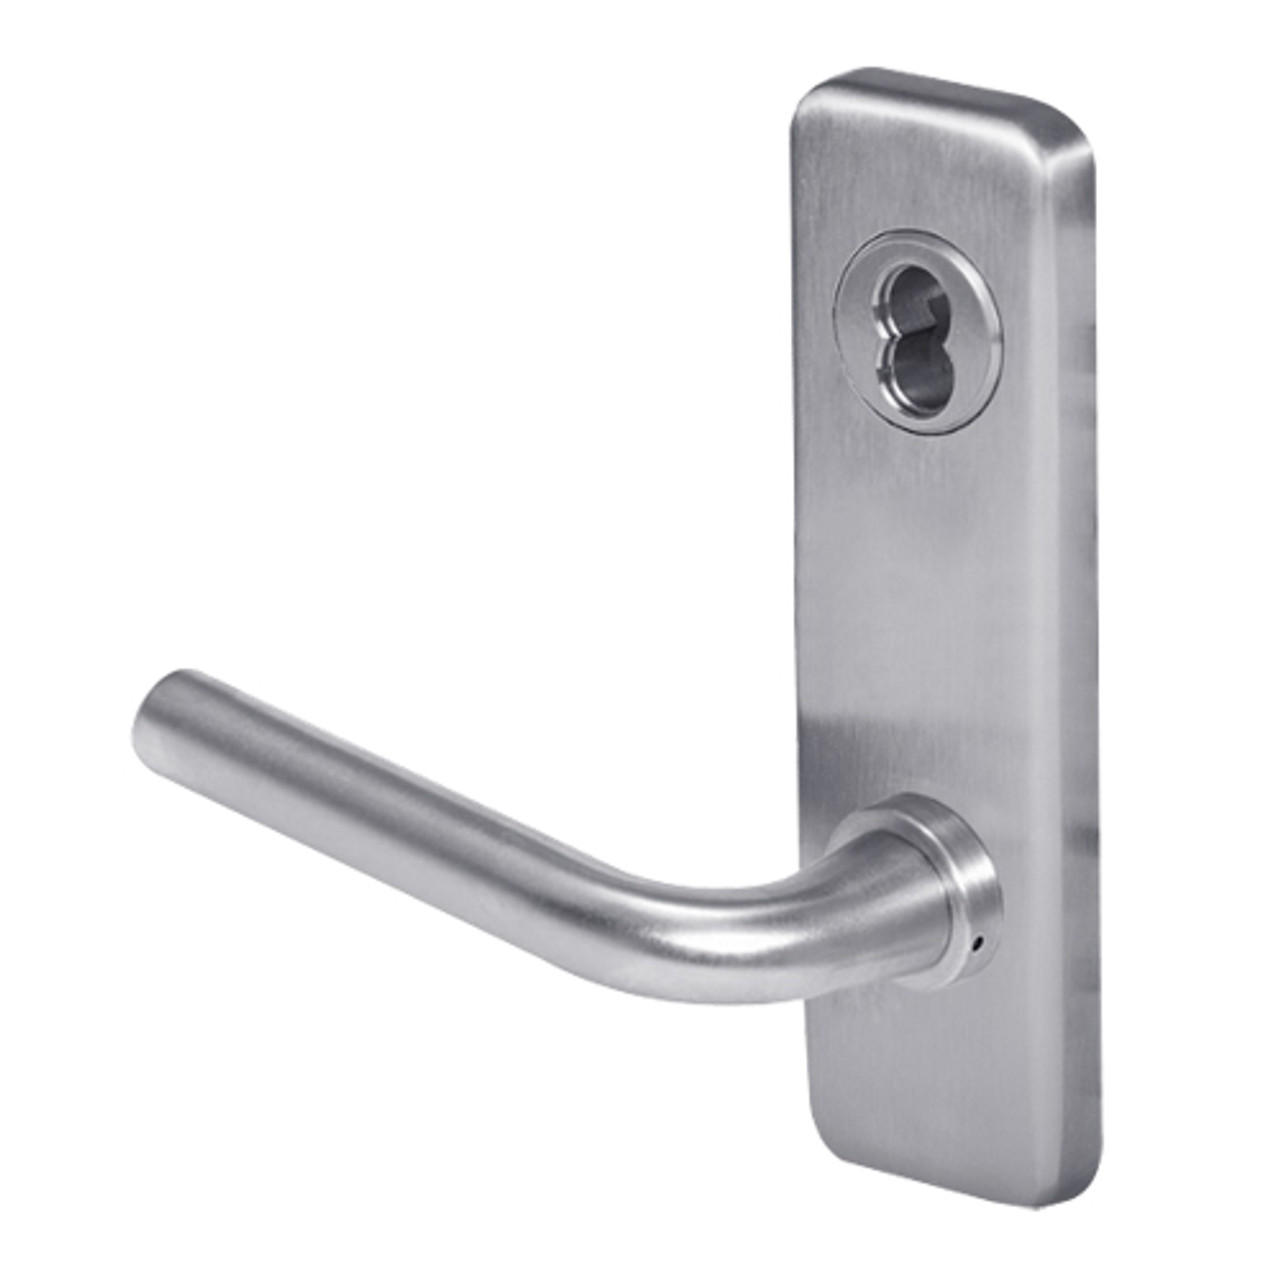 45HW7TWEL12J626RQE Best 40HW series Double Key Deadbolt Fail Safe Electromechanical Mortise Lever Lock with Solid Tube w/ No Return Style in Satin Chrome